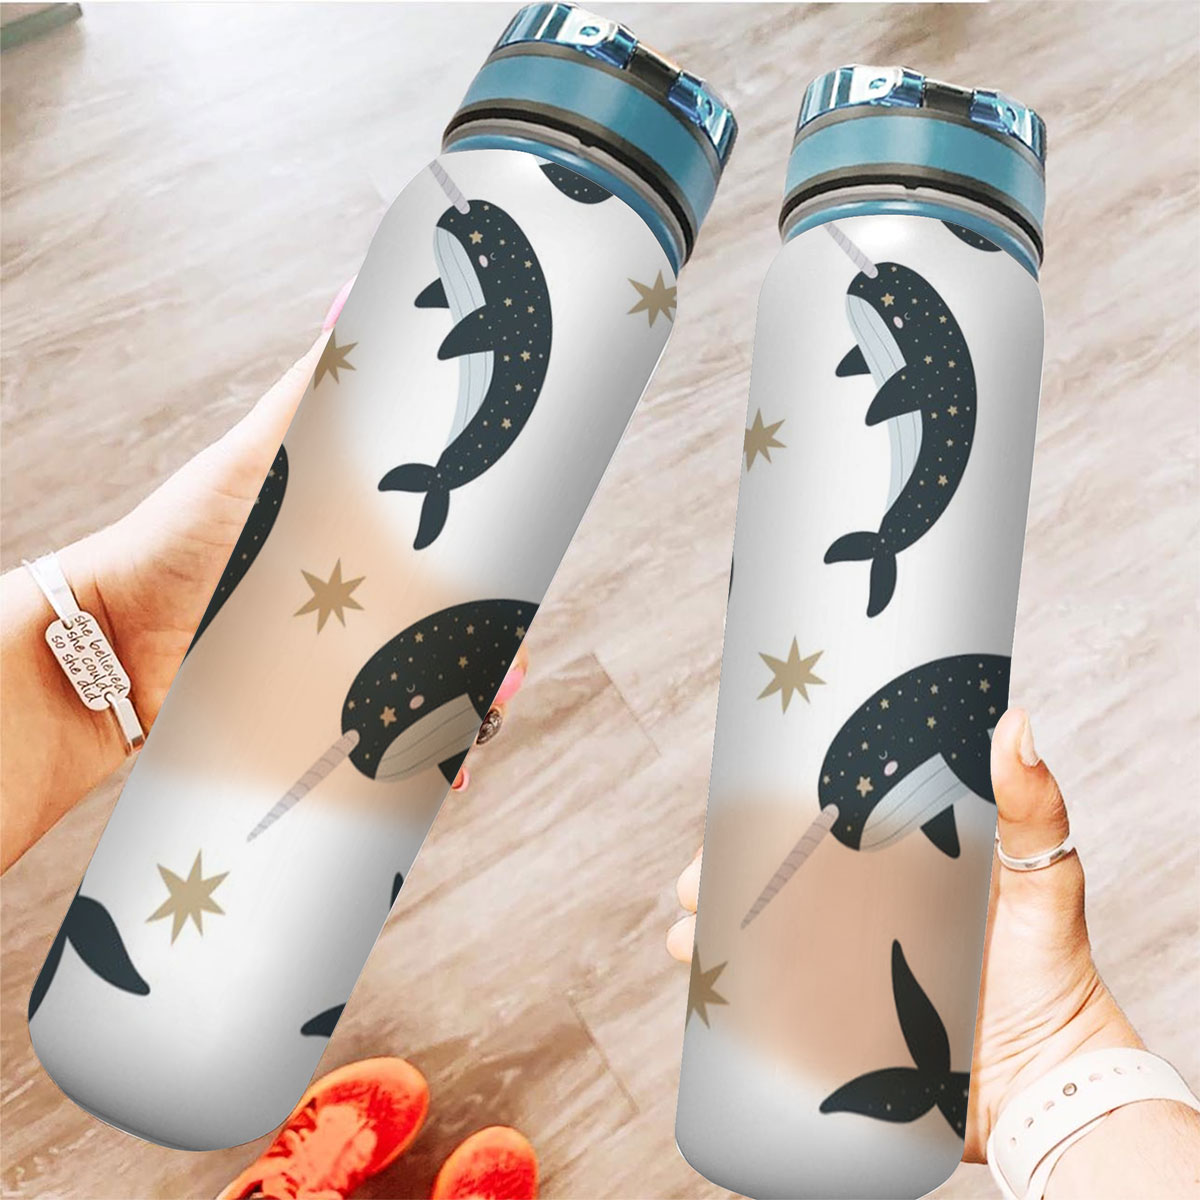 Star Narhwhal Whale Tracker Bottle